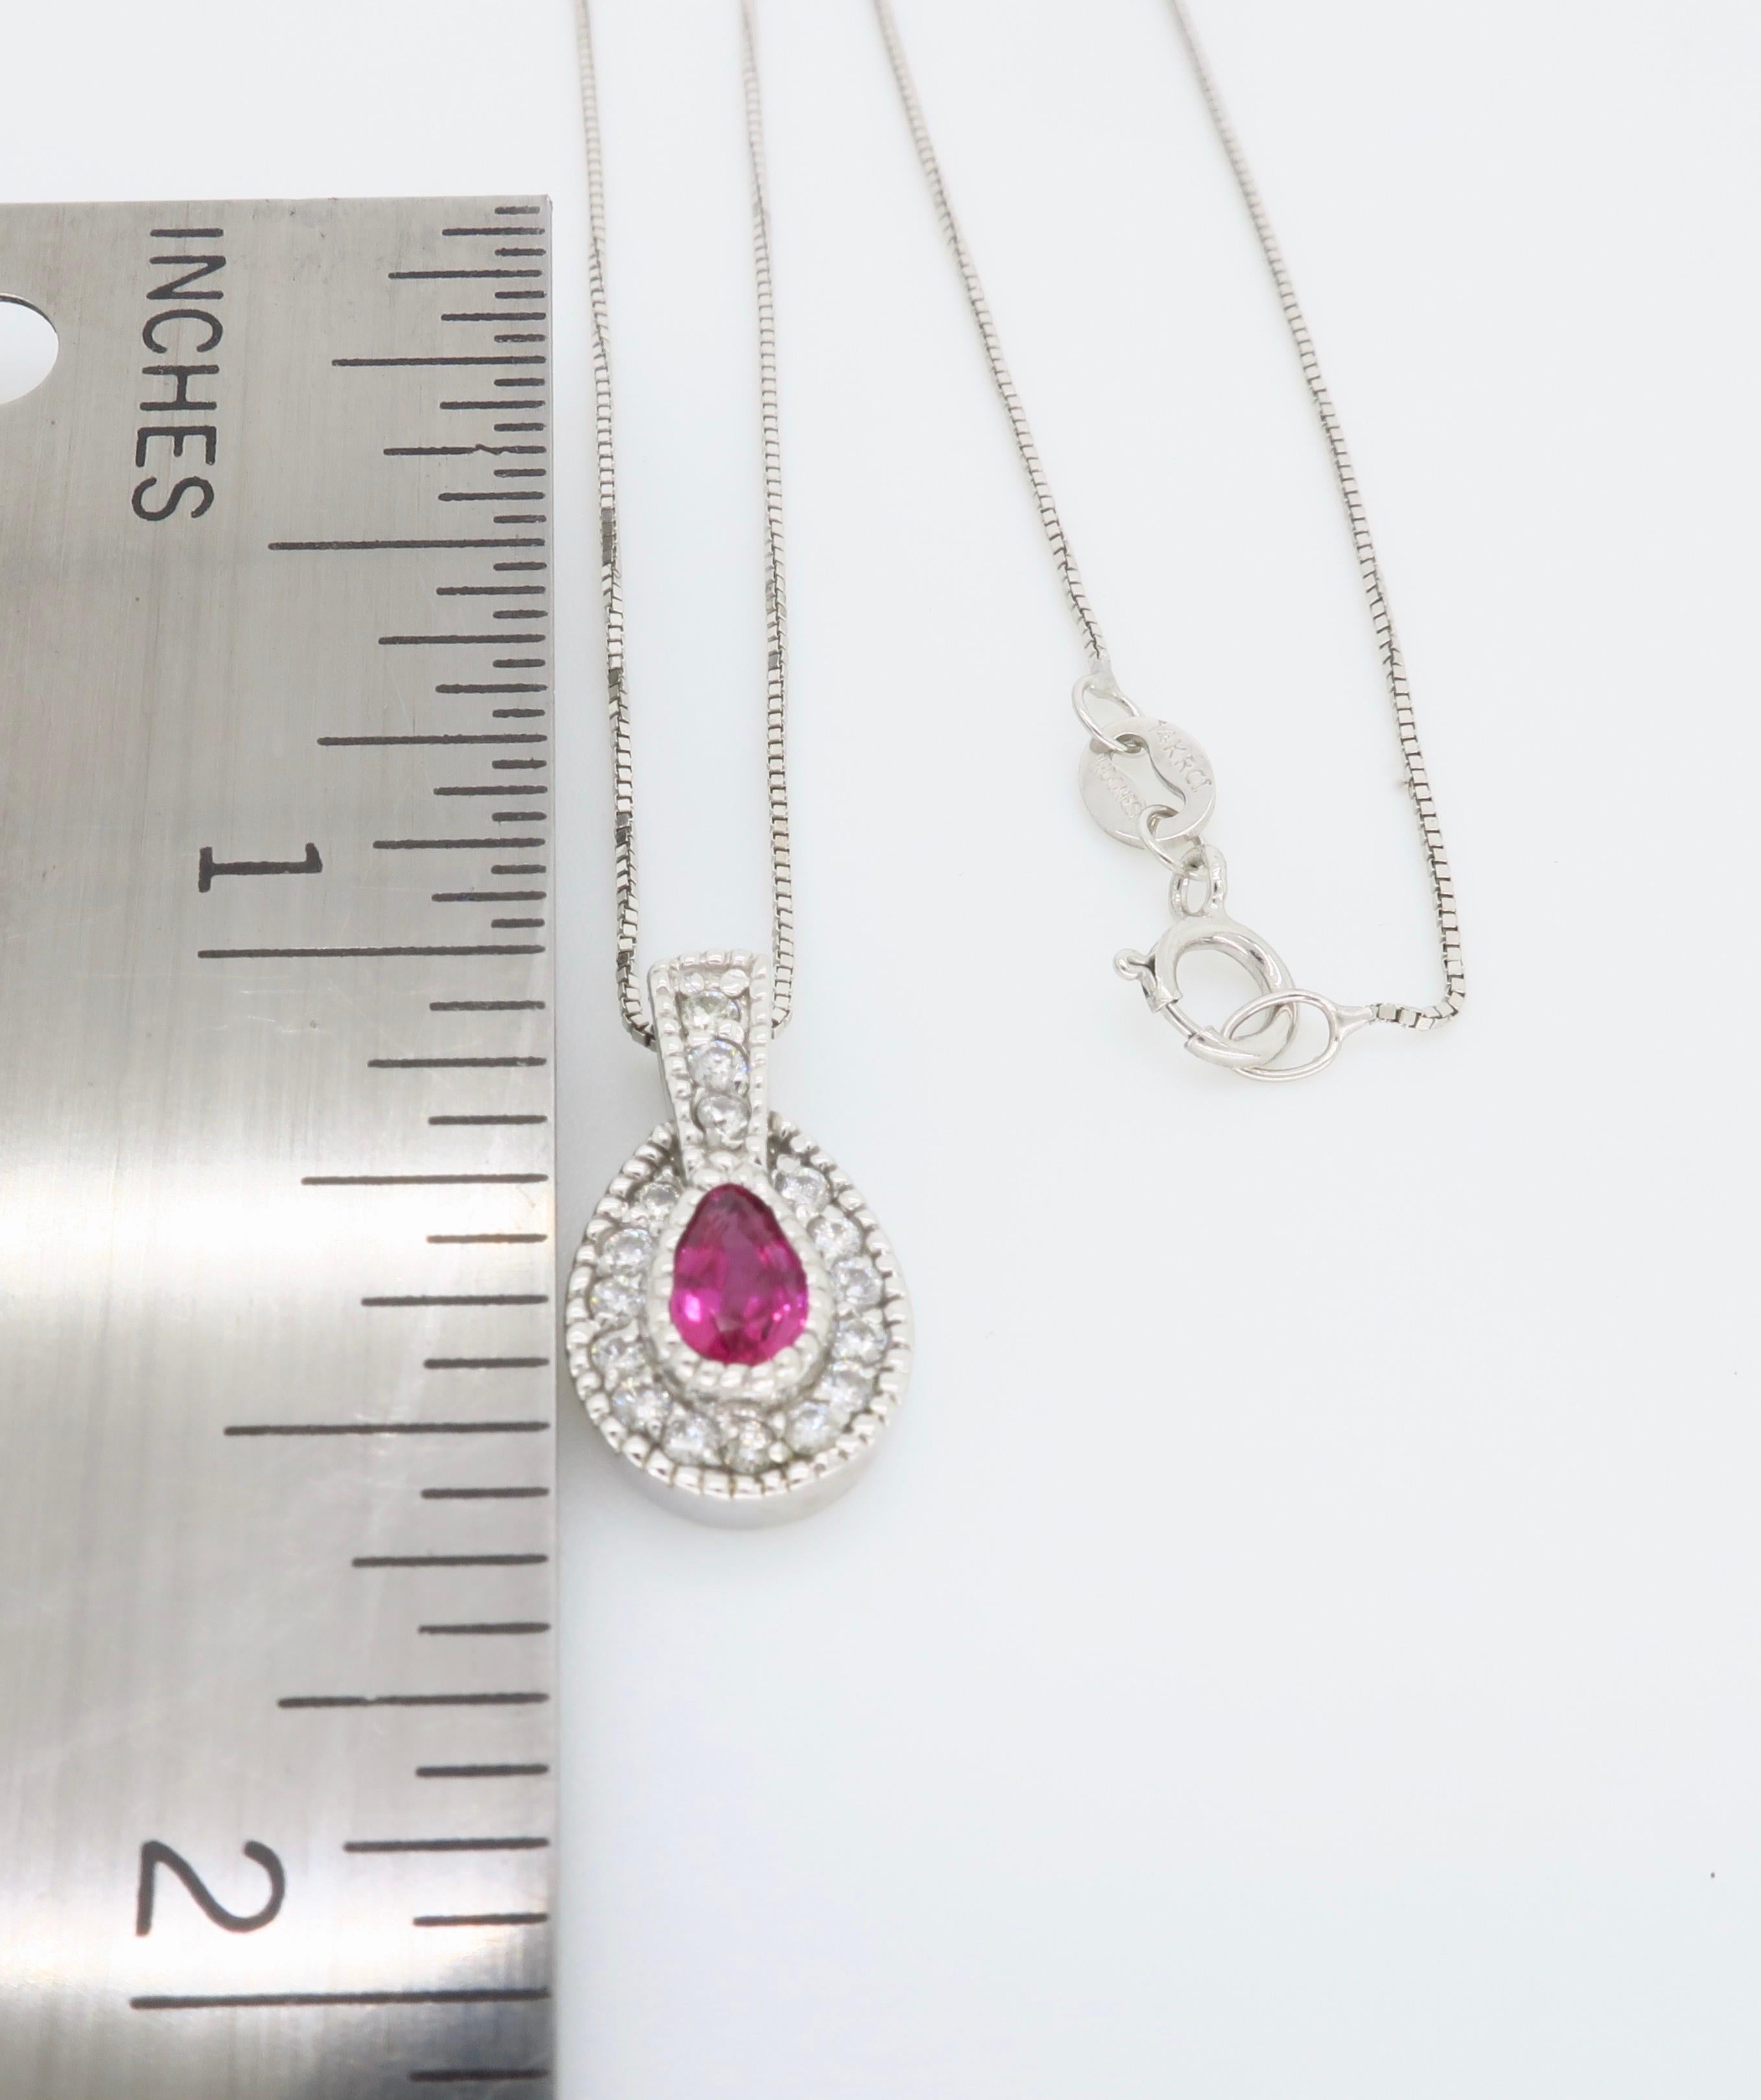 Ruby and Diamond halo style pendant necklace crafted in 14k white gold.

Gemstone: Ruby & Diamond
Gemstone Carat Weight: Approximately 4.9x3.25mm
Diamond Carat Weight: .19CTW
Diamond Cut: Round Brilliant Cut Diamonds
Color: Average G-I
Clarity: